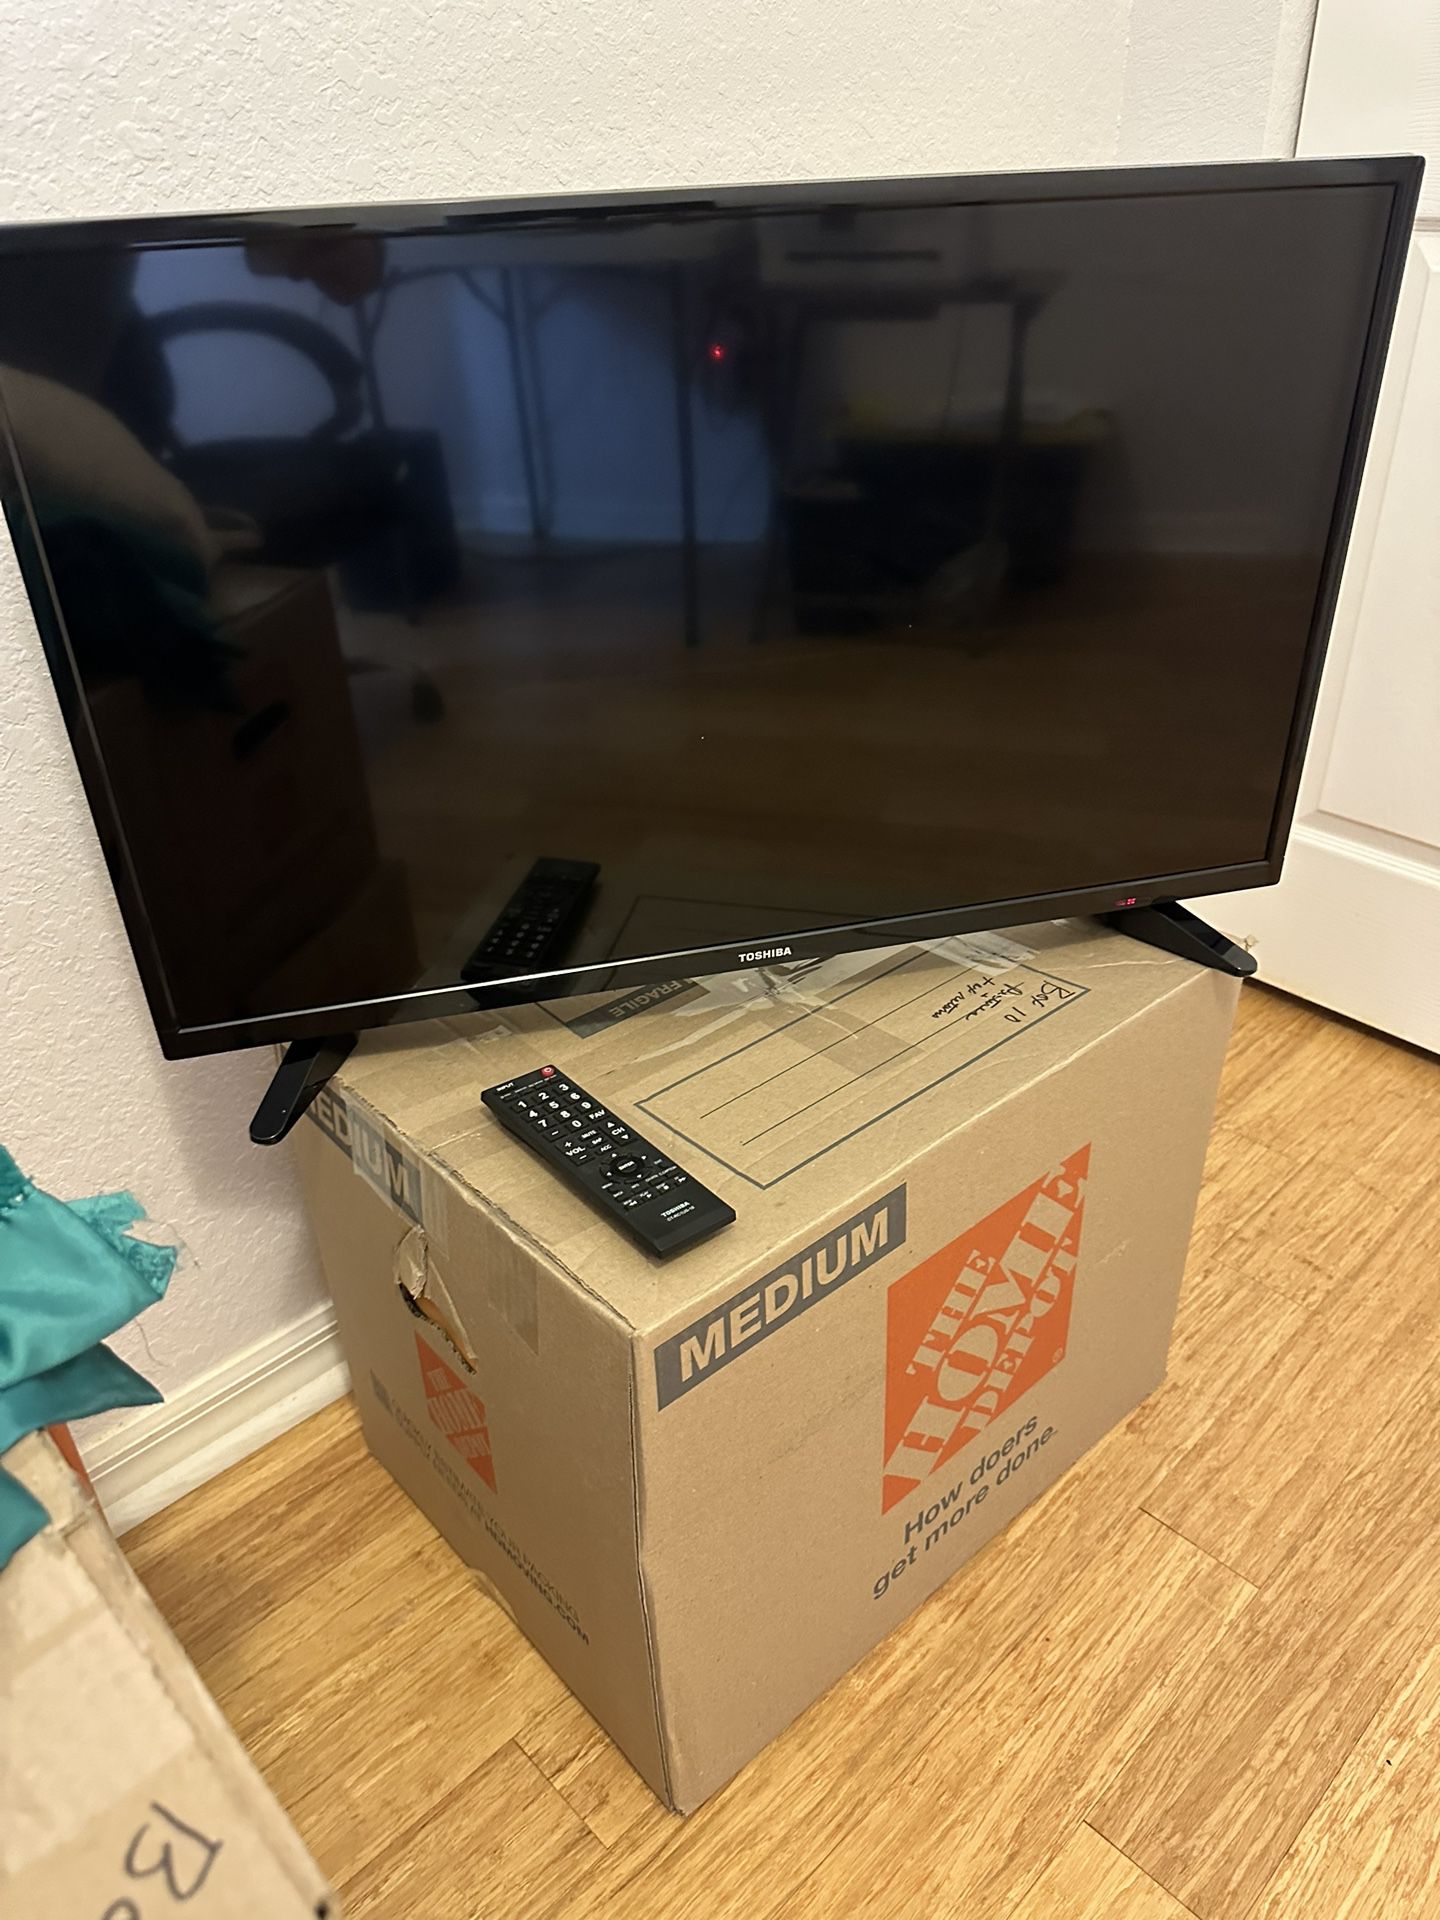 32 Inch Toshiba LCD TV and Firestick